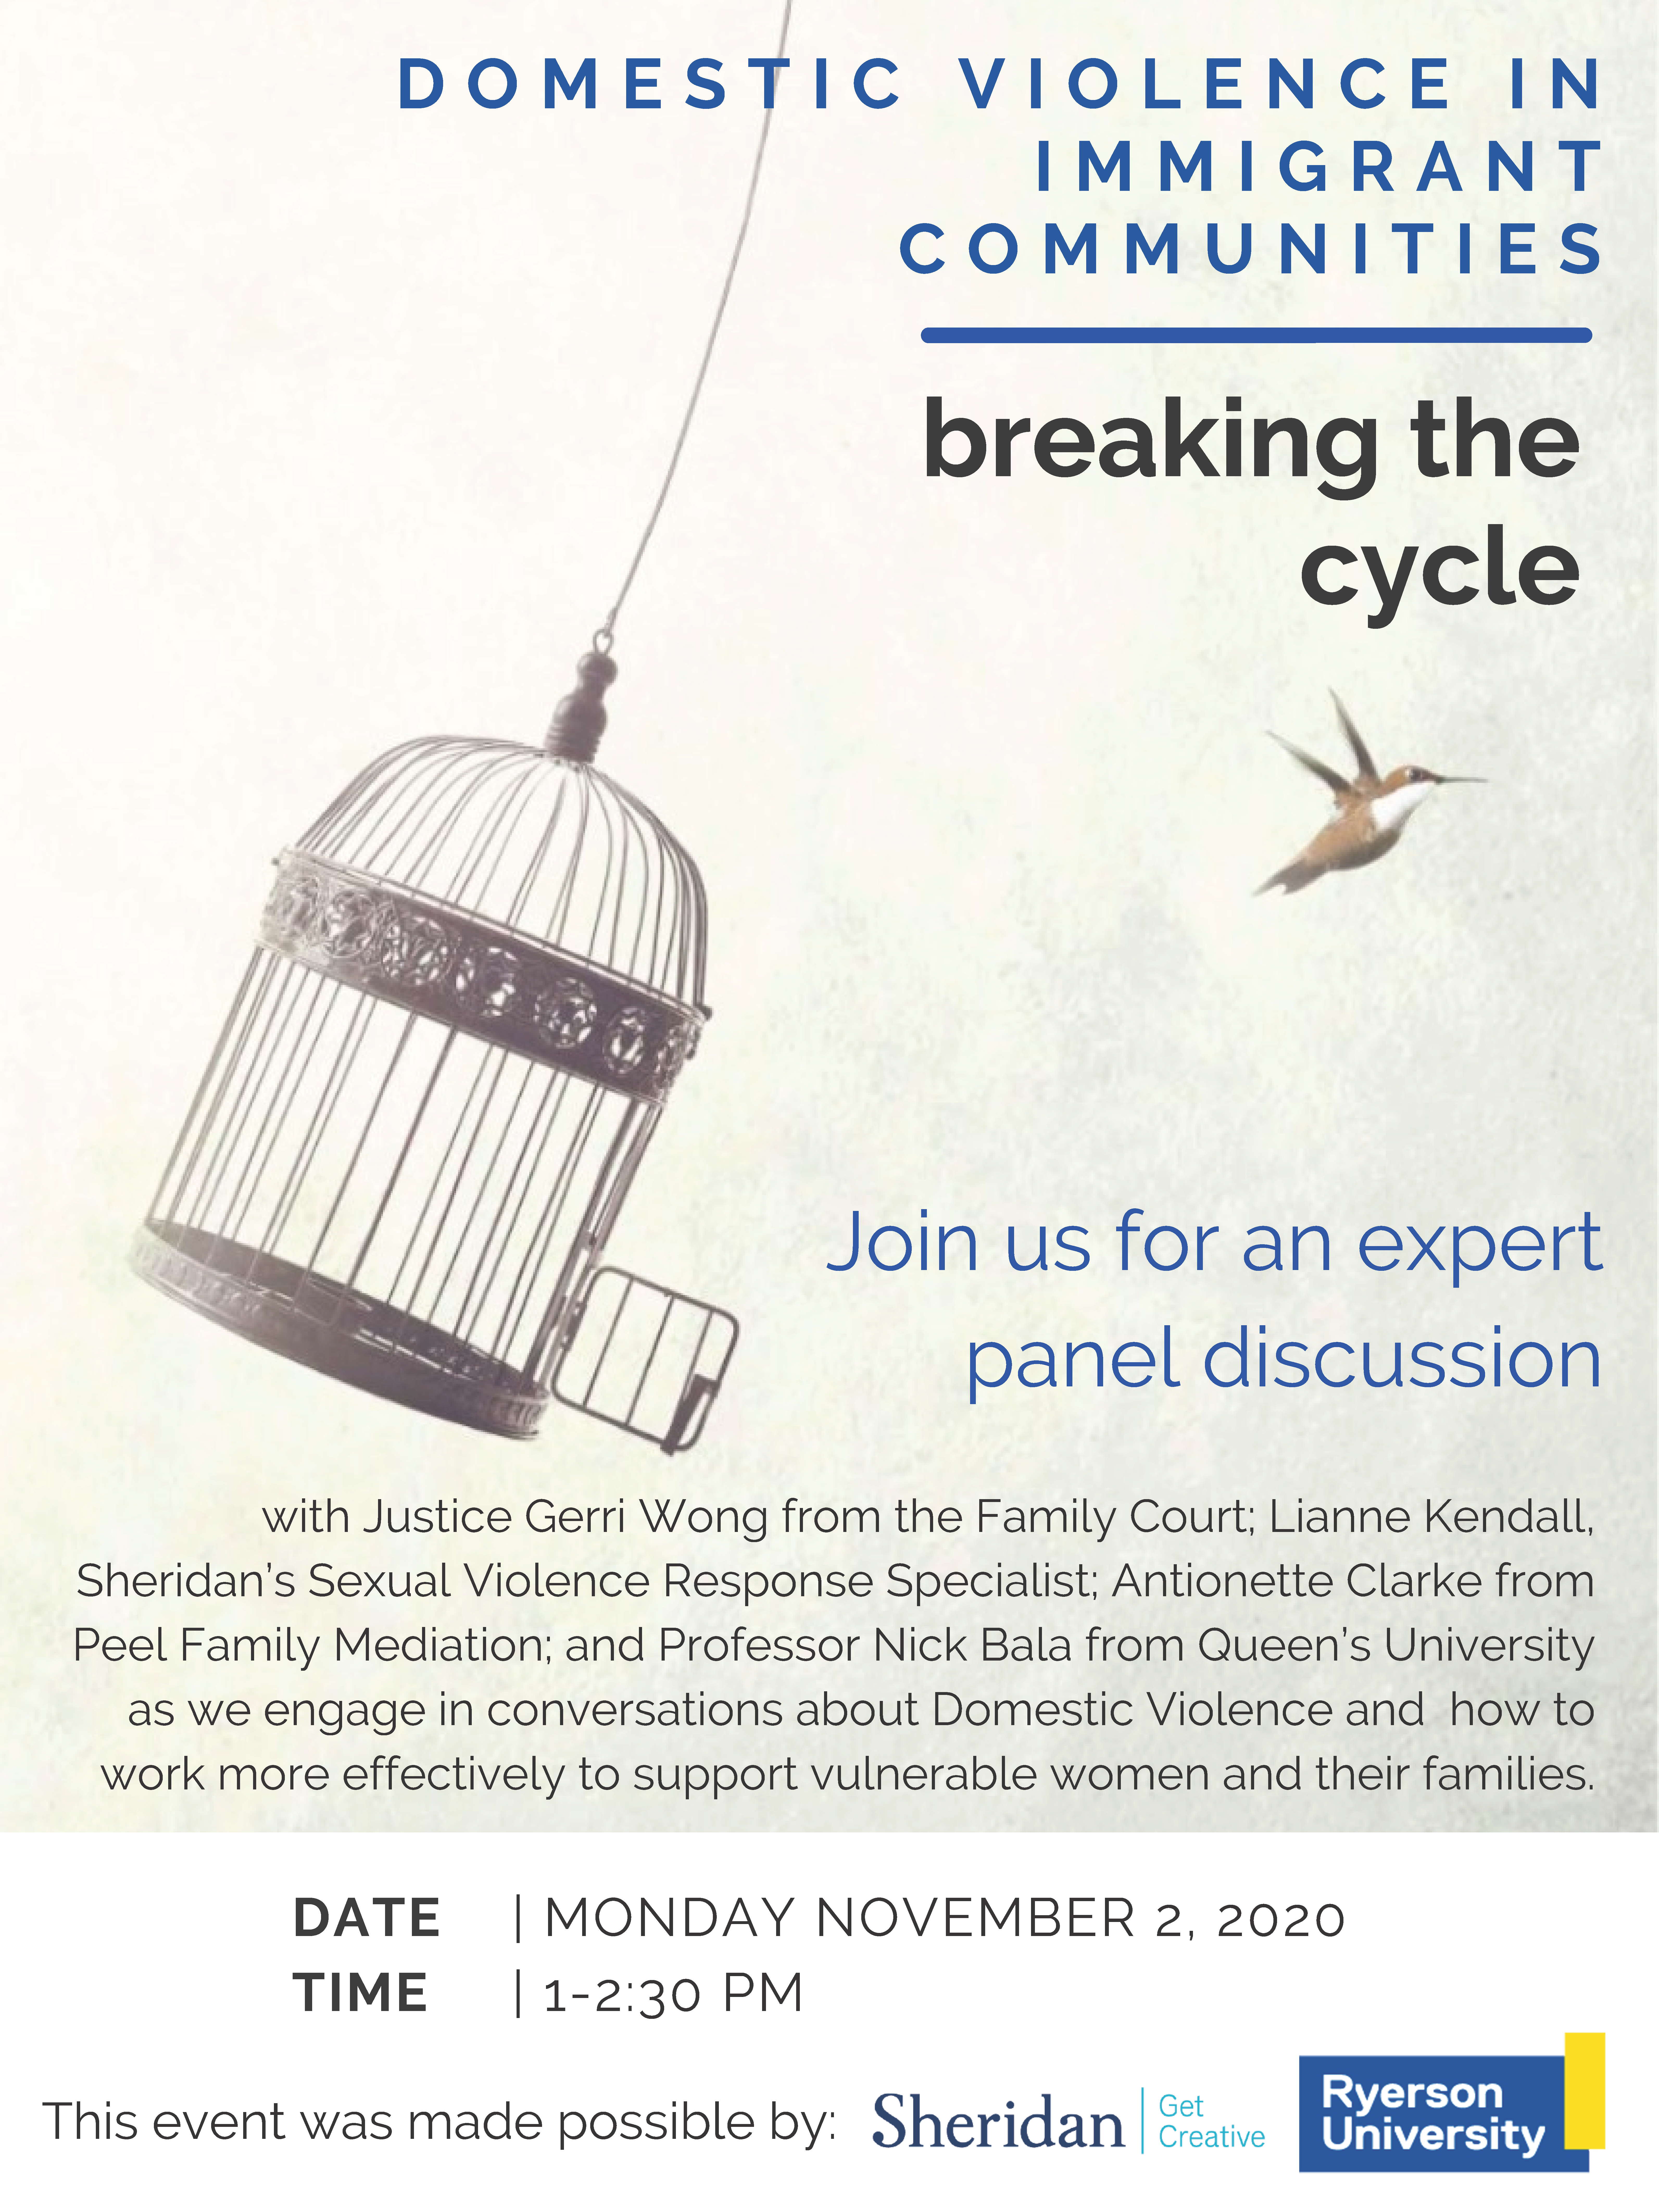 Domestic Violence in Immigrant Communities: Breaking the Cycle